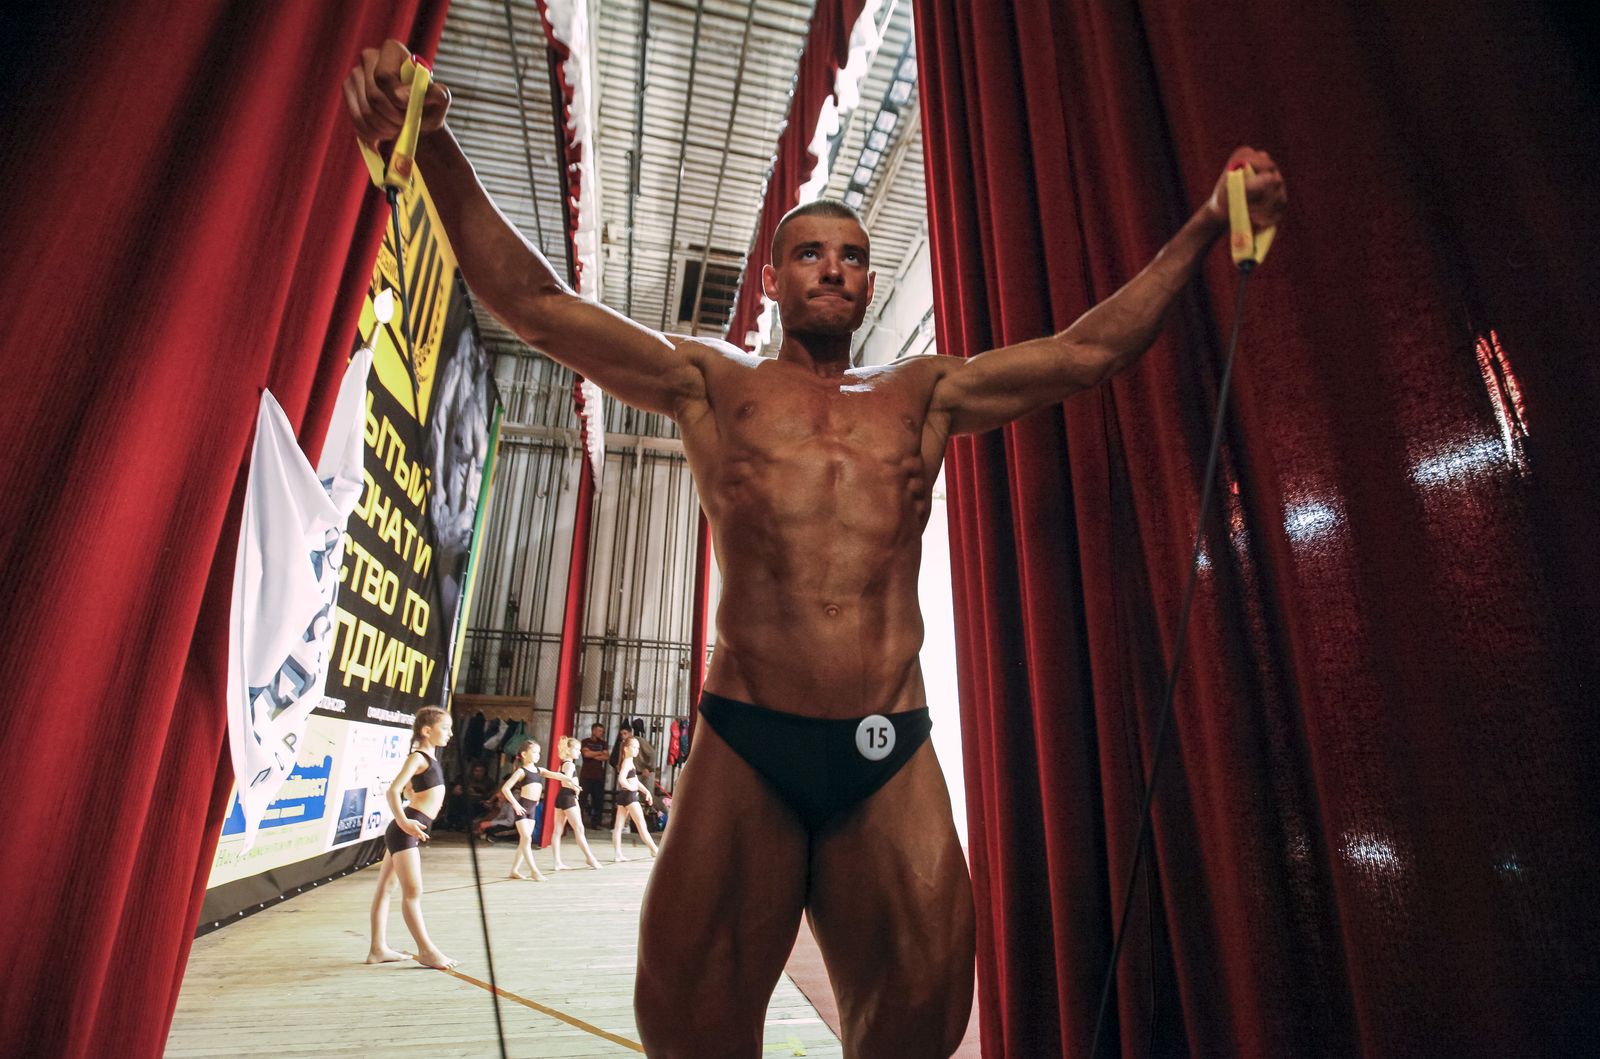 © EDUARD KORNIYENKO - Image from the PUMPING IRON IN RUSSIA photography project